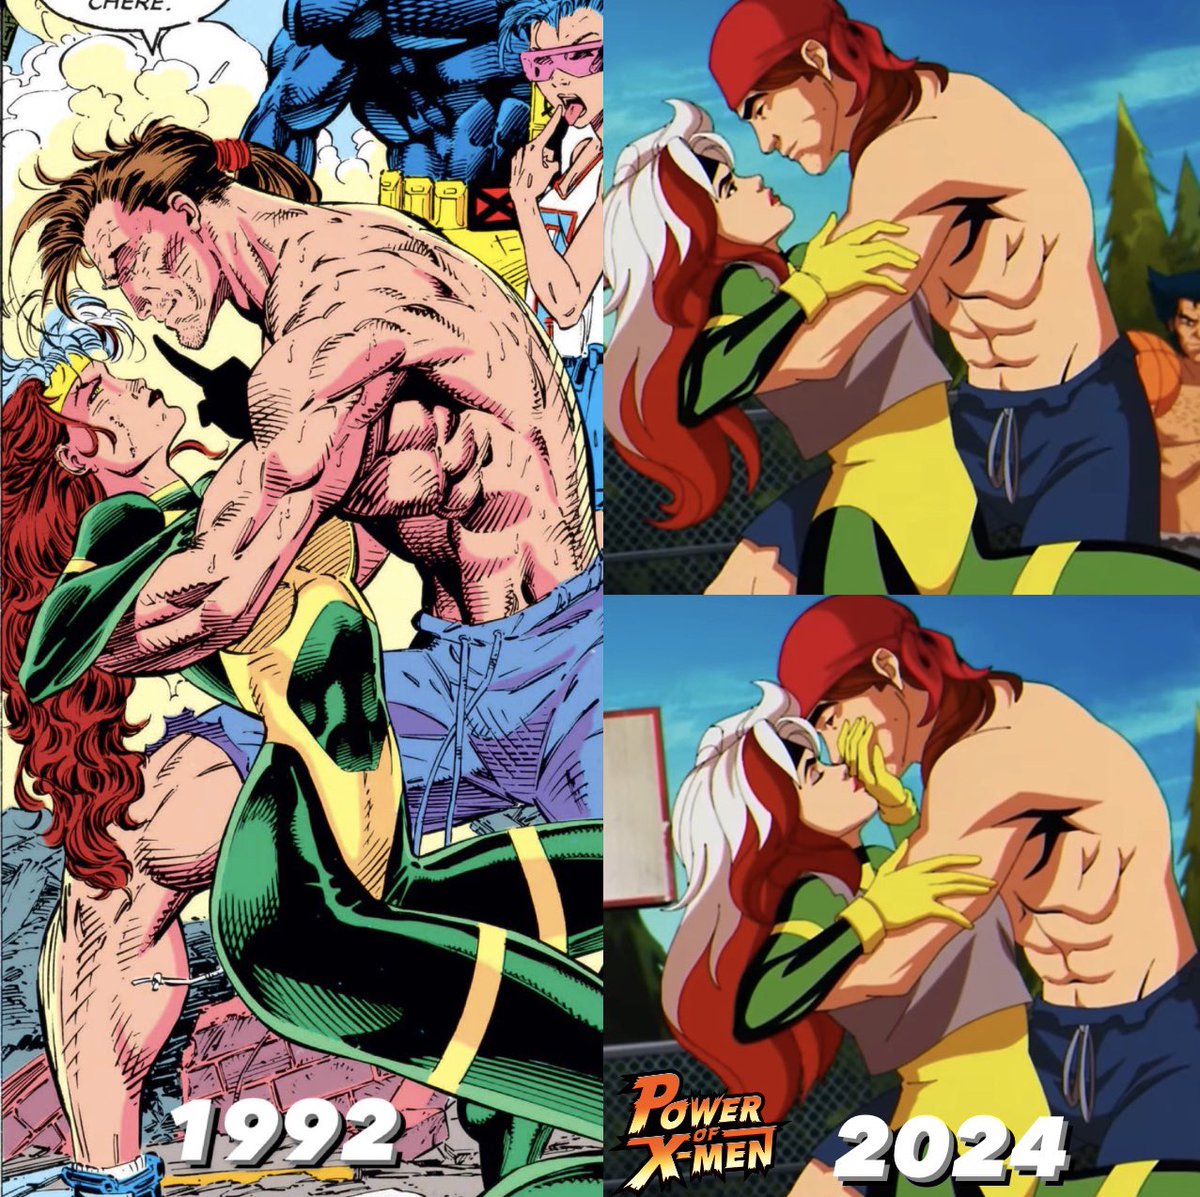 🚨OPENING CREDITS EASTER EGGS🚨 SO MANY EASTER EGGS THIS WEEK! But a non-spoilery one comes from the opening credits, where we get a scene of Rogue and Gambit ripped out of X-Men issue 4, art by Jim Lee! #XMen97 #xmen #xspoilers #Marvel #MCU #disney